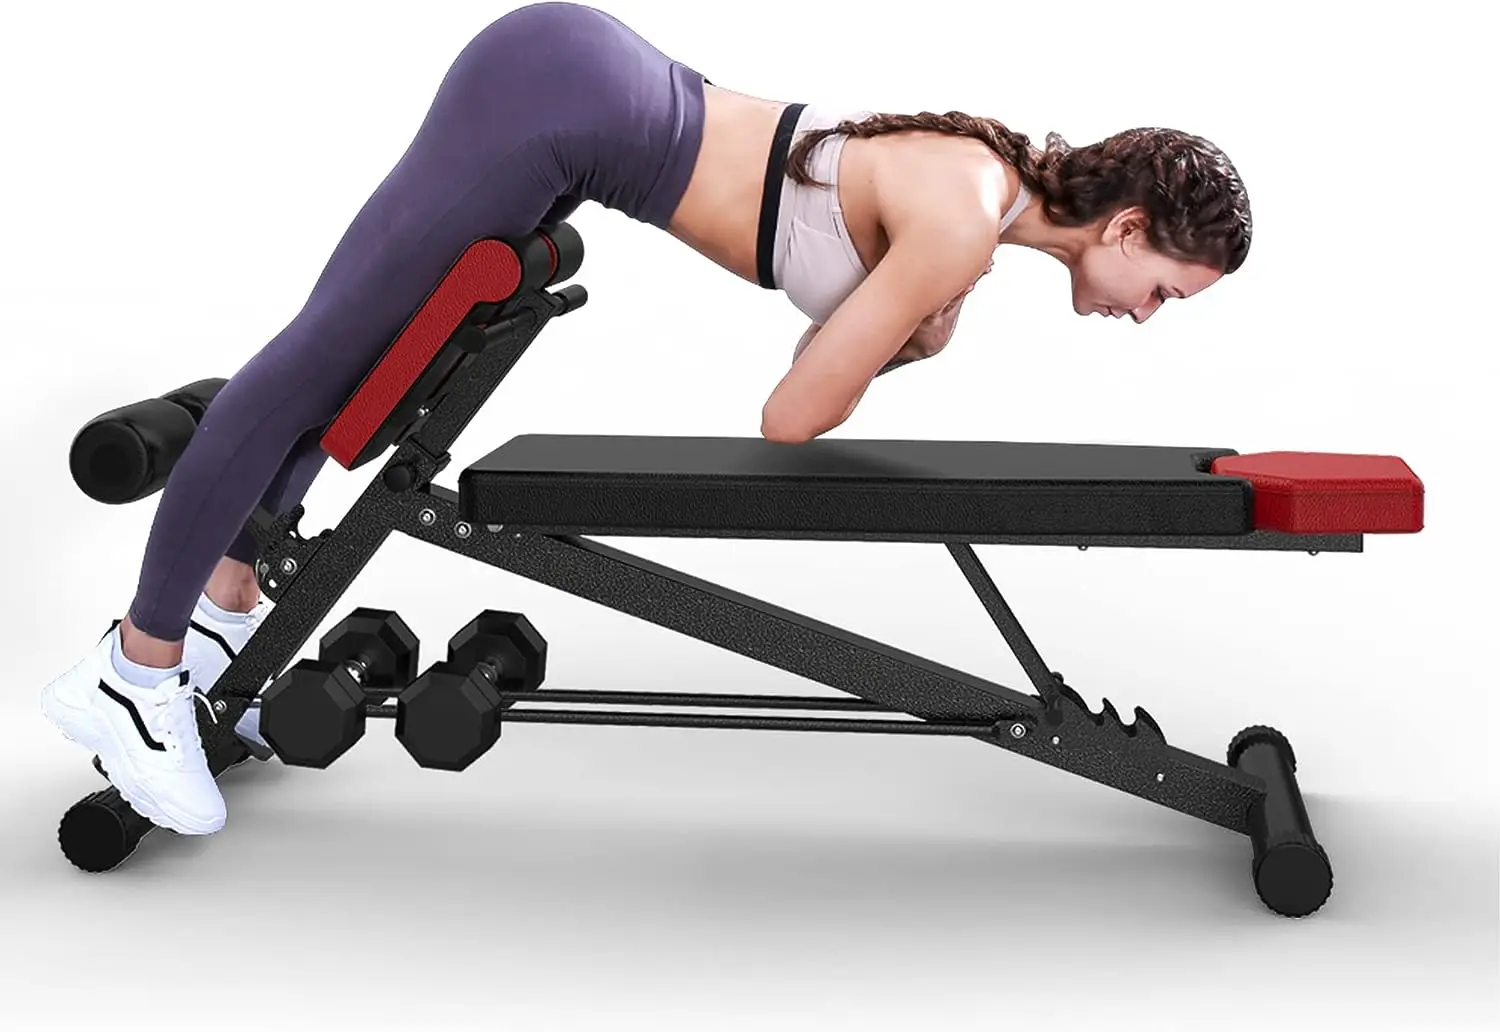 https://ae01.alicdn.com/kf/Scf0c0157ac044124b18d1c7372dc5c7cT/FORM-Multi-Functional-Adjustable-Weight-Bench-for-Total-Body-Workout-u2013-Back-Extension-Roman-Chair-Adjustable.jpg